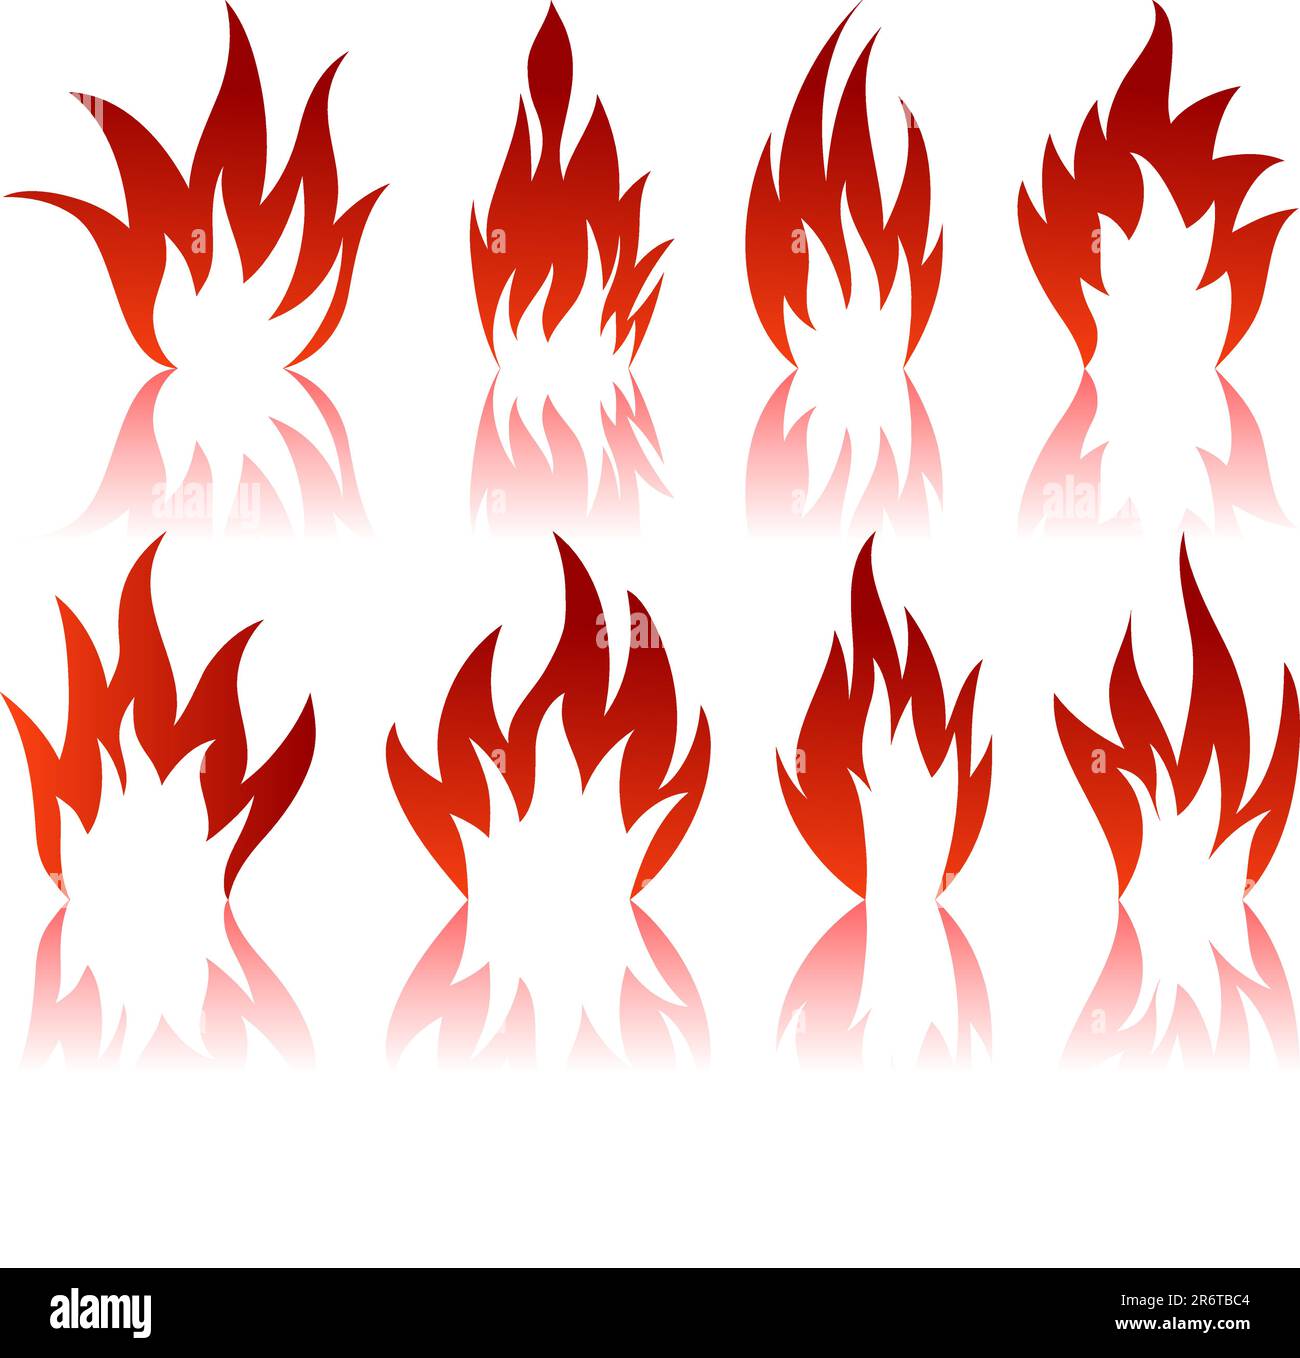 Set of different fire patterns for design use Stock Vector